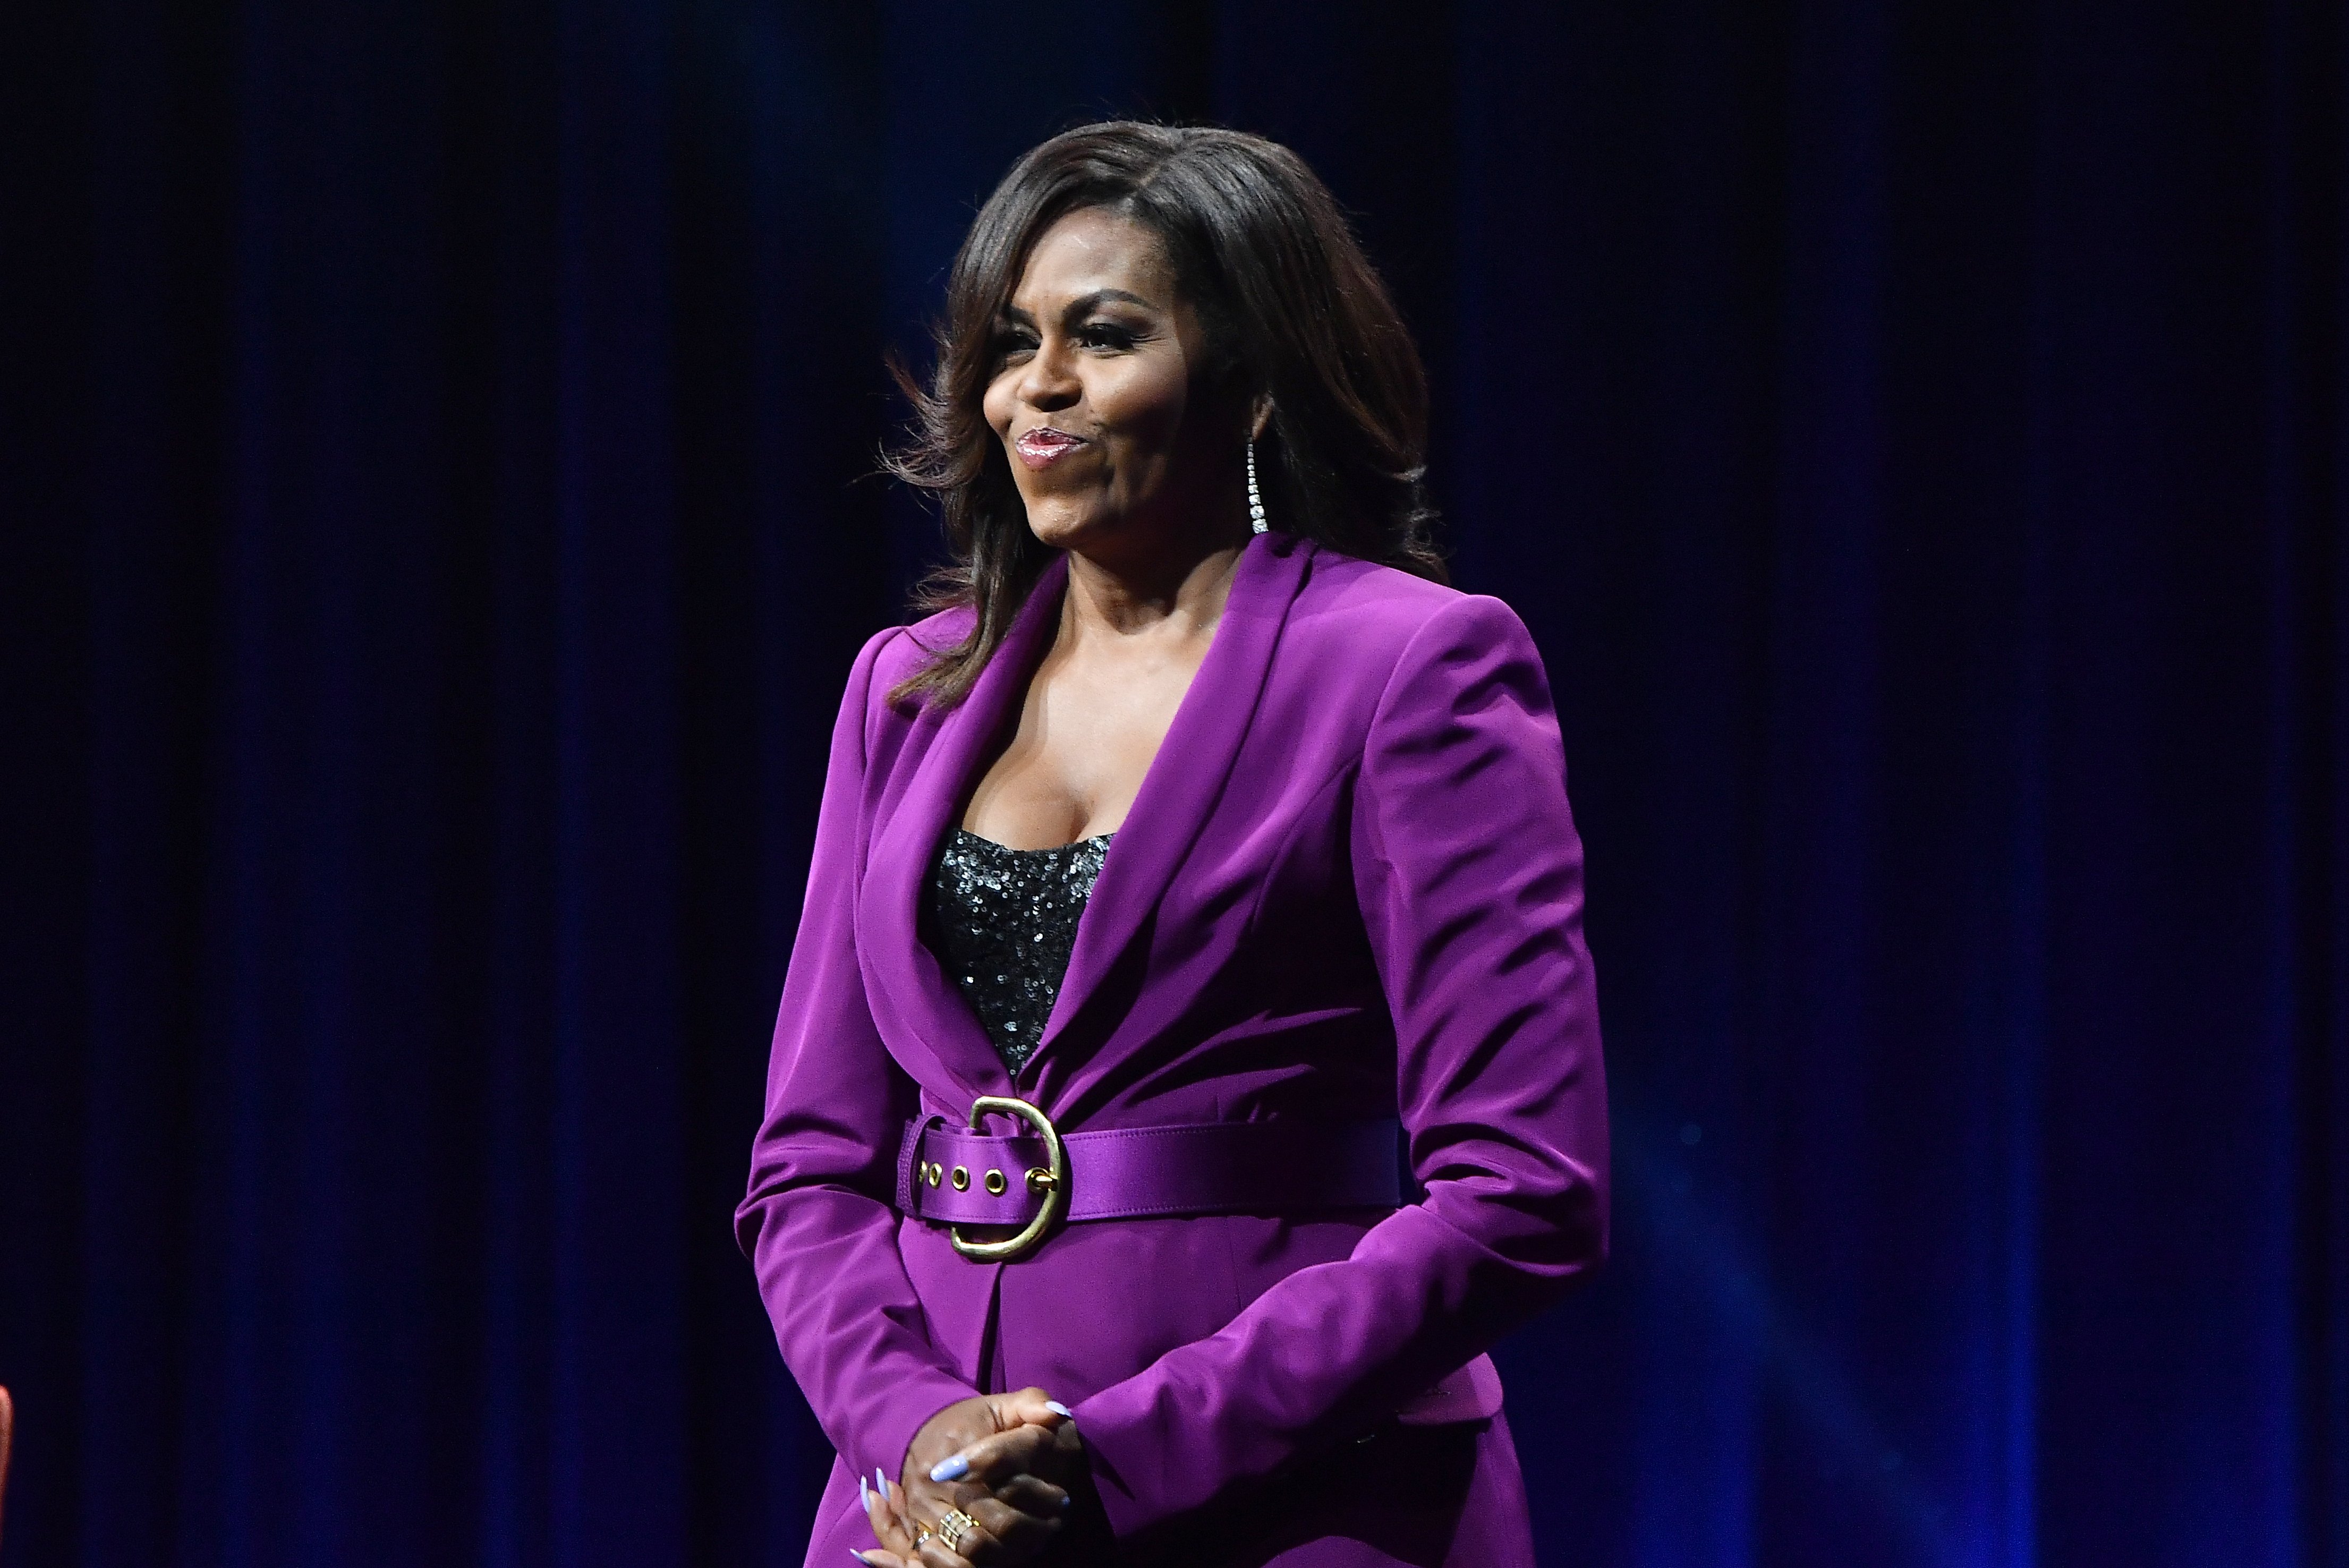 Michelle Obama, former First Lady of the United States | Photo: Getty Images